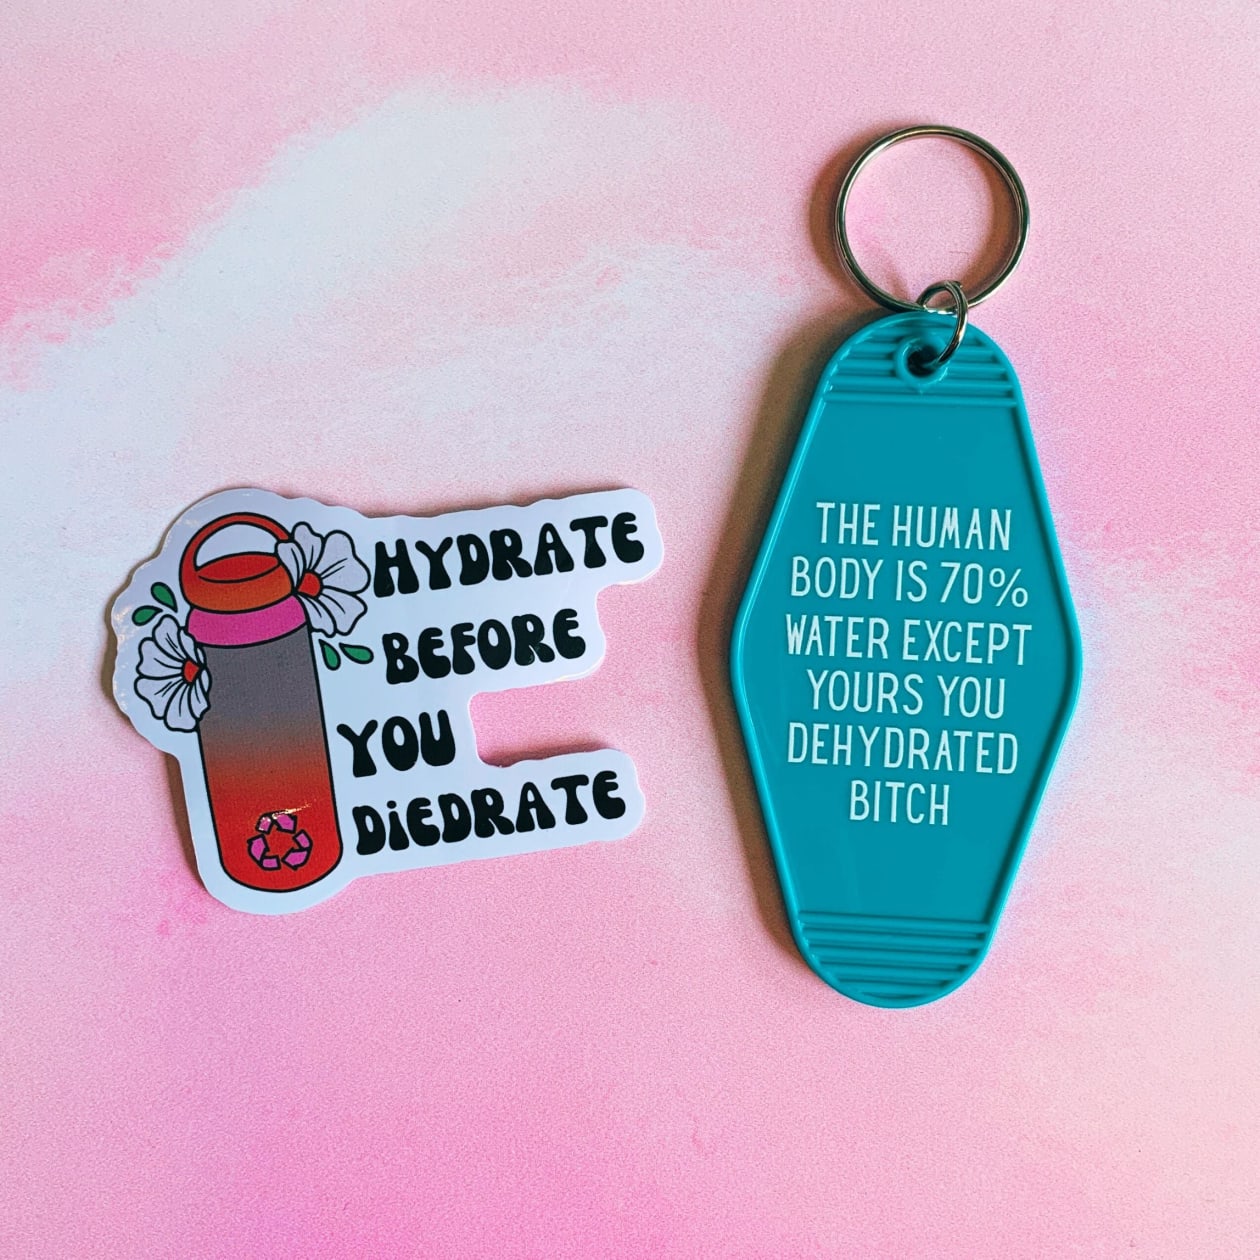 The Human Body is 70% Water Except Yours You Dehydrated B*tch Motel Style Keychain in Blue